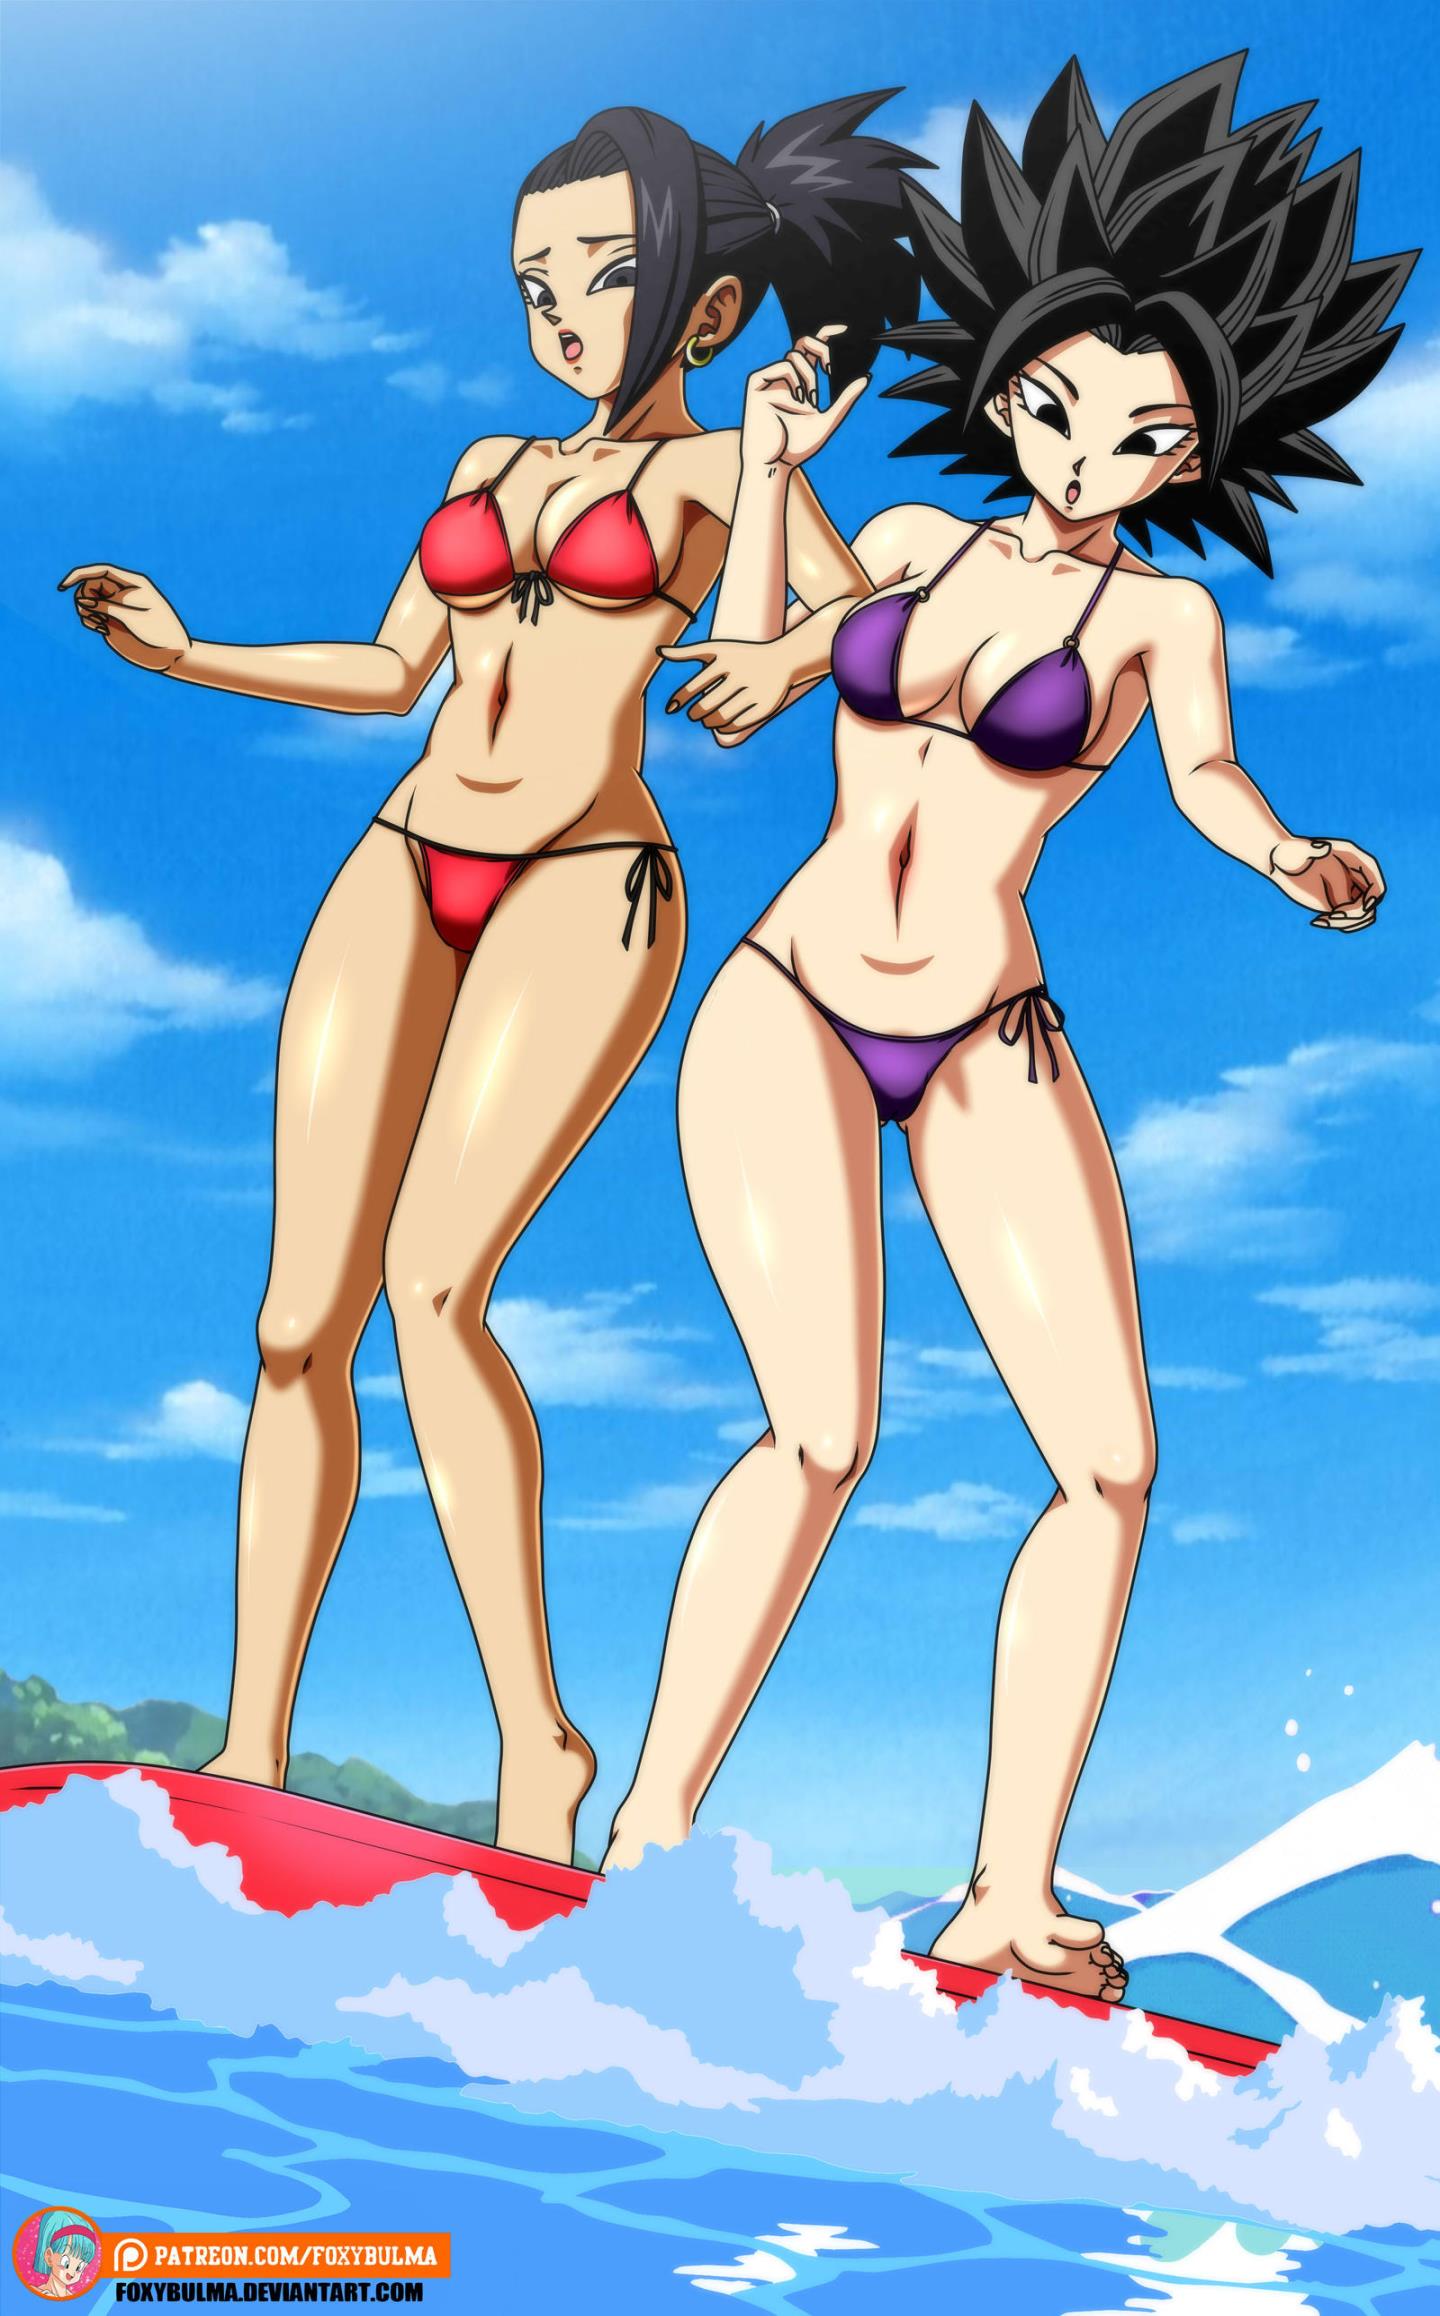 Hairy Pussy Ann Curry - Kale and Caulifla on the beach - Dragon Ball Z Gallery | OpenSea